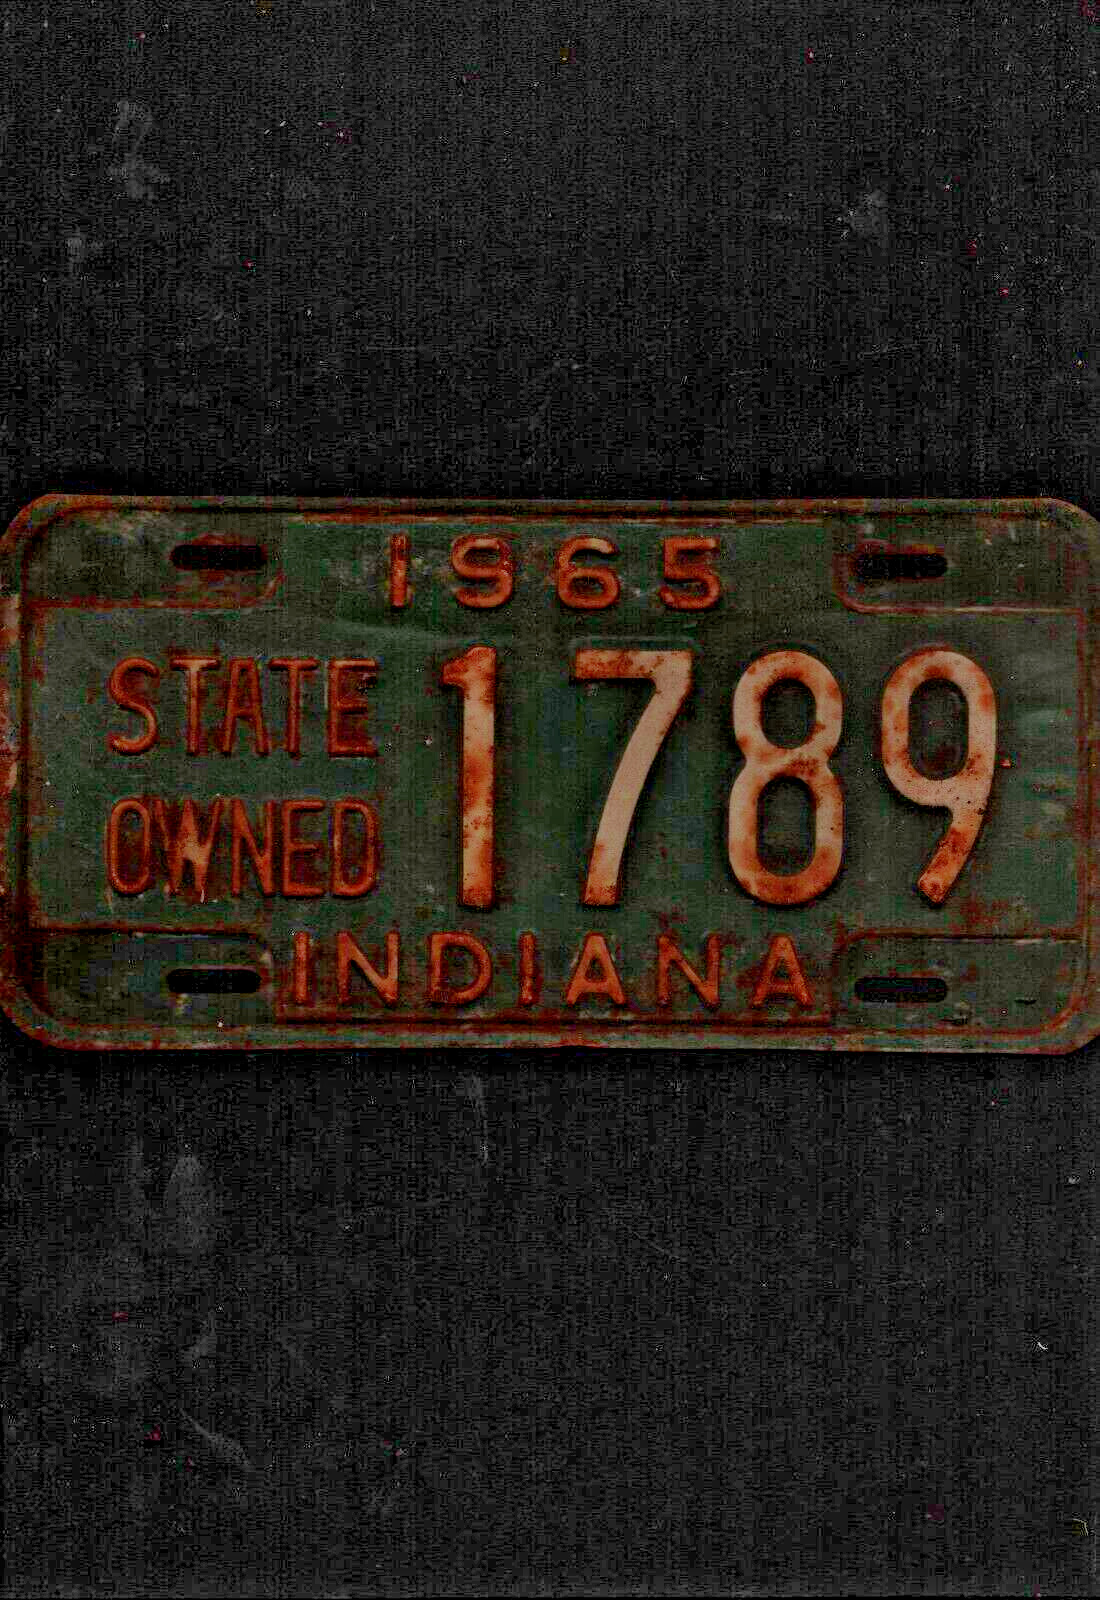 Vintage 1965 STATE OWNED INDIANA  License Plate - Crafting Birthday MANCAVE slf